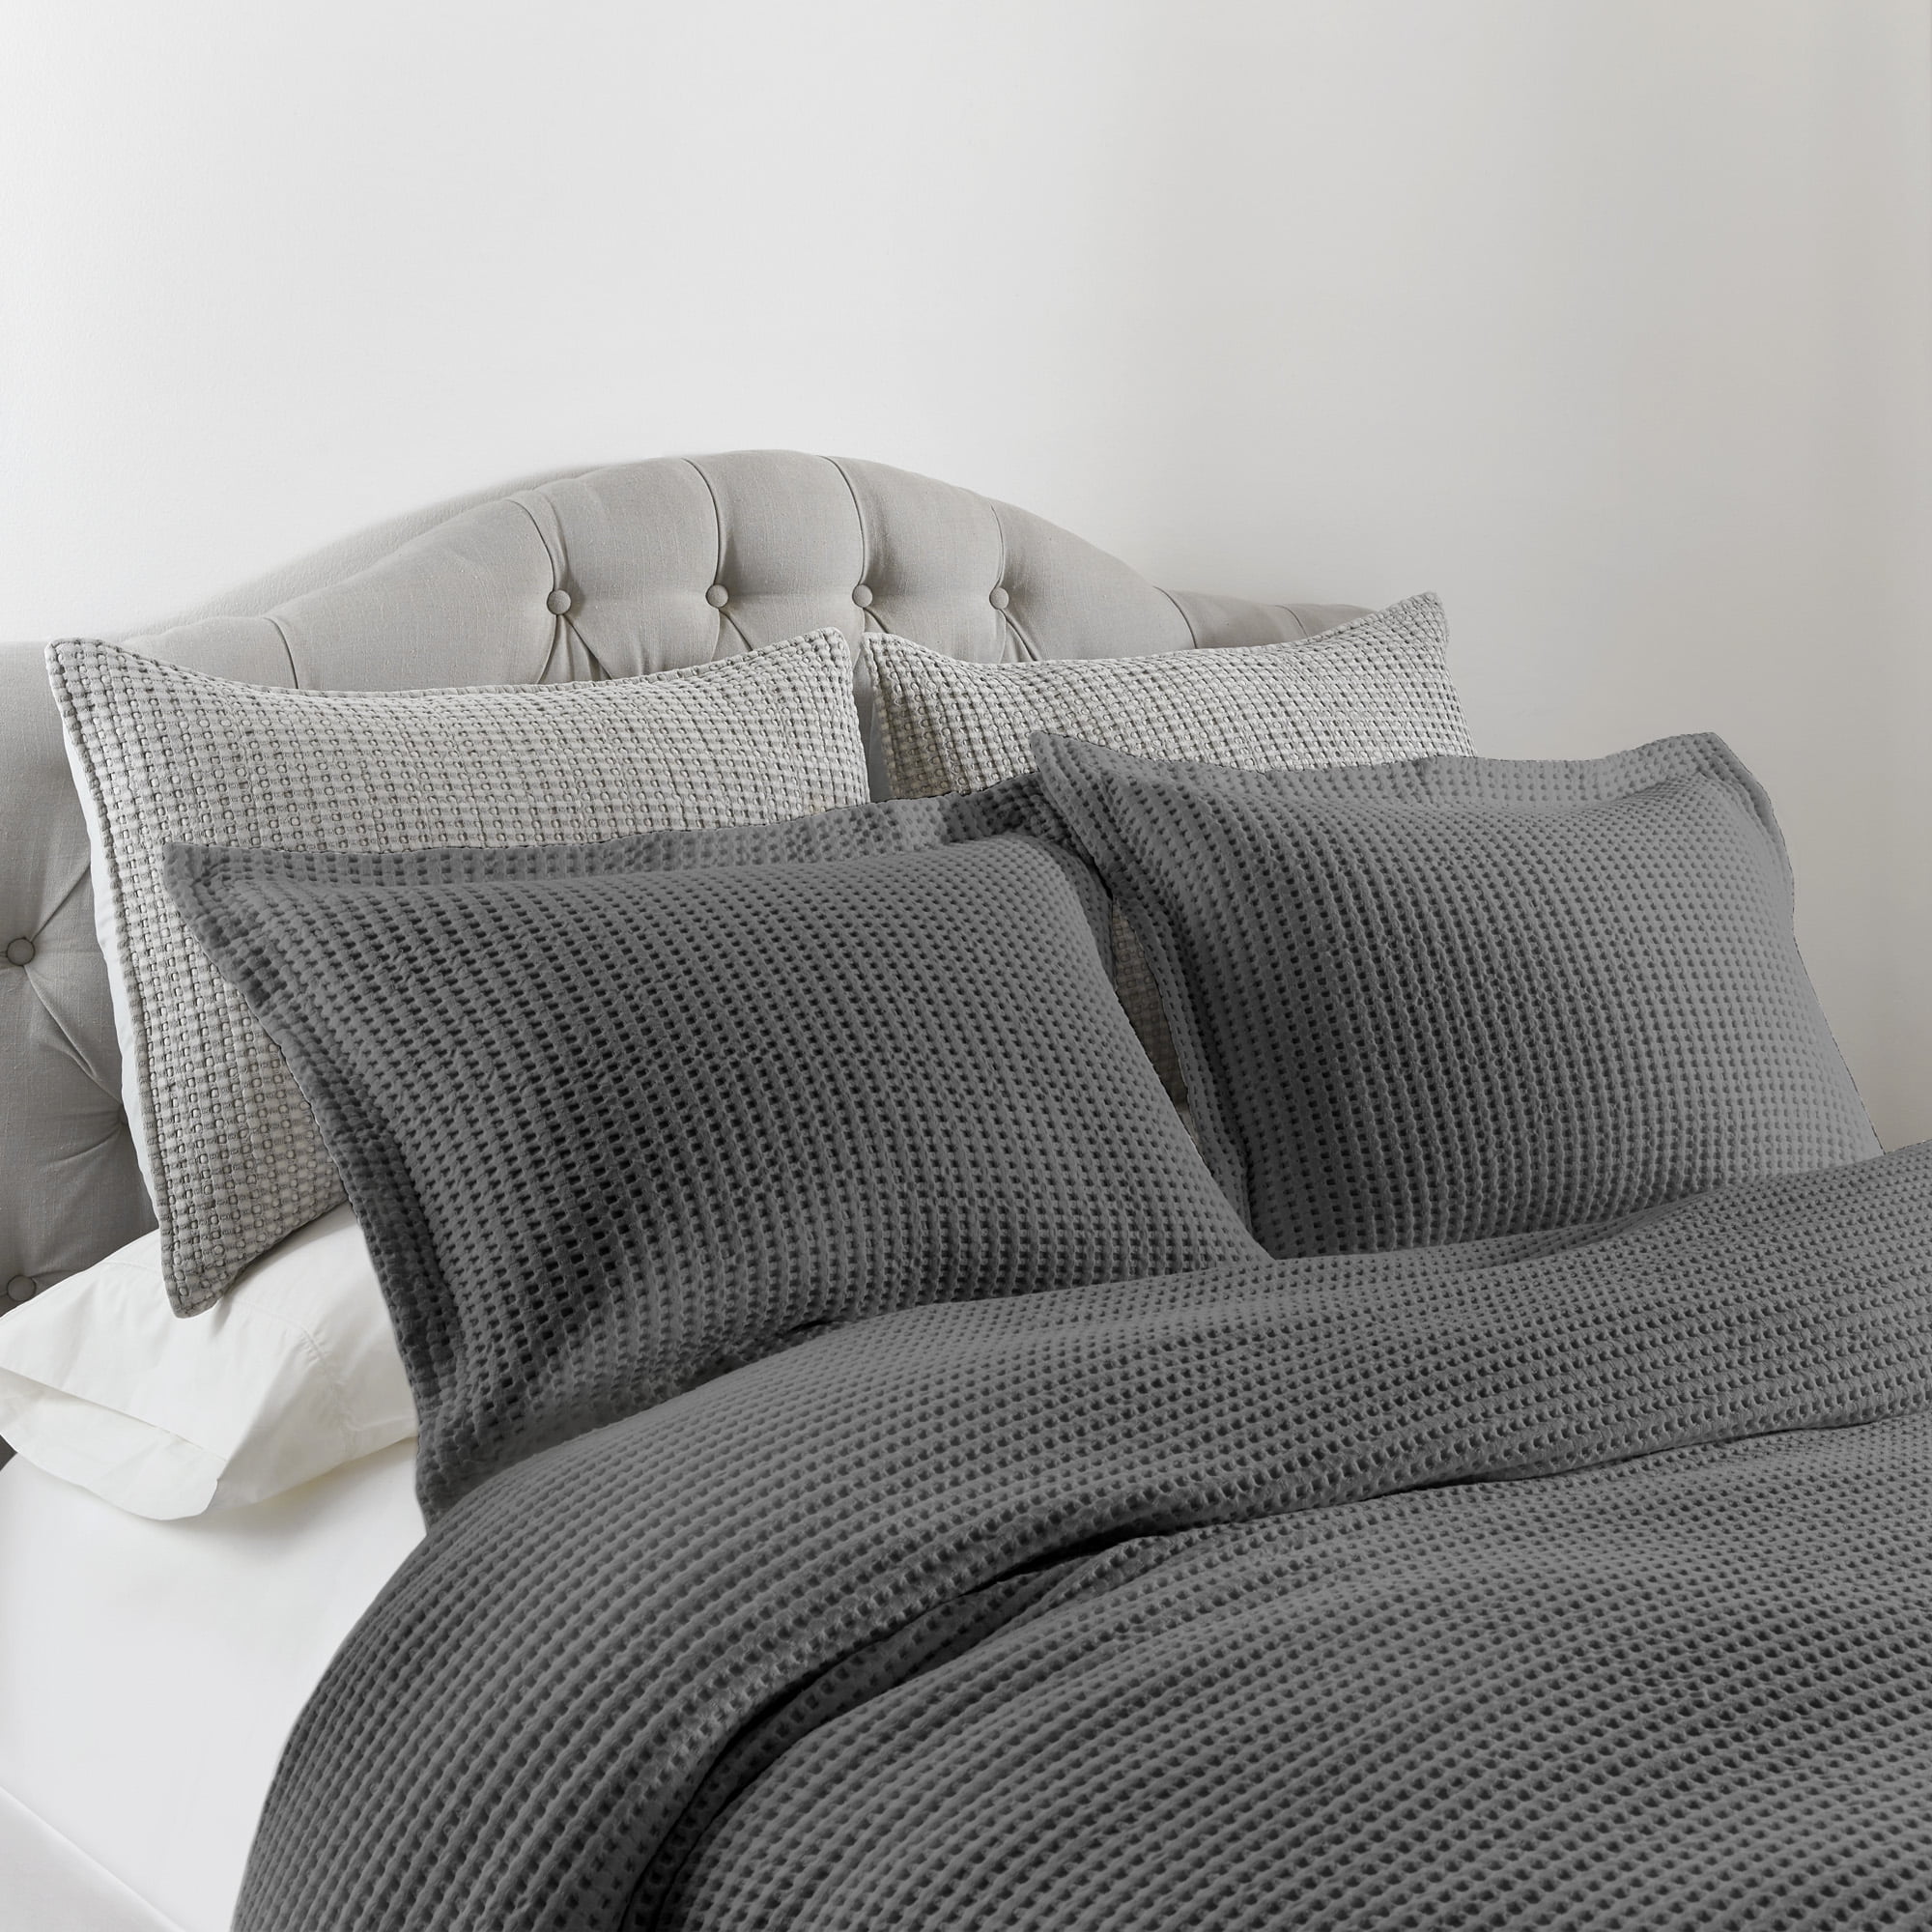 Grey Modern Decorative Bed Pillows and Luxurious Bedding – Tribute